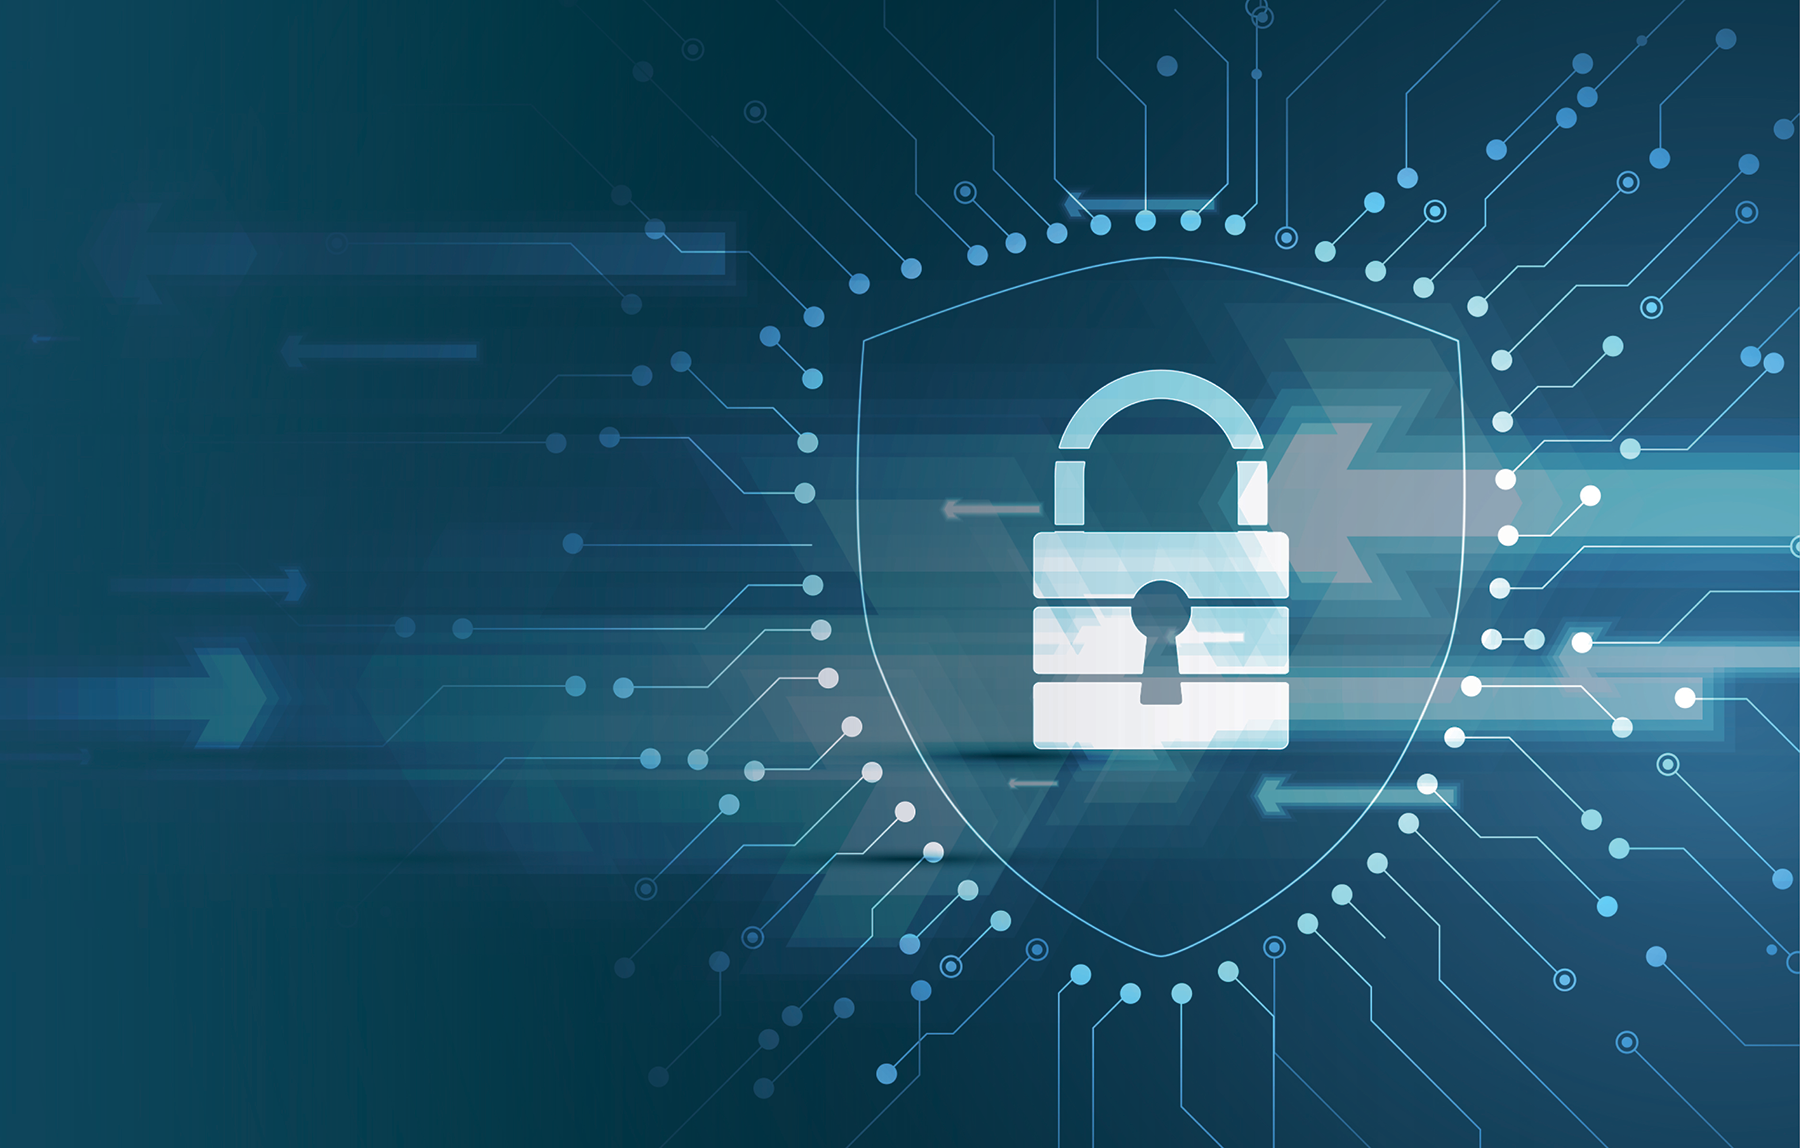 The 3 Critical Components of Effective Cybersecurity - image of lock on circuitboard background | Image Credit: kras99 / stock.adobe.com